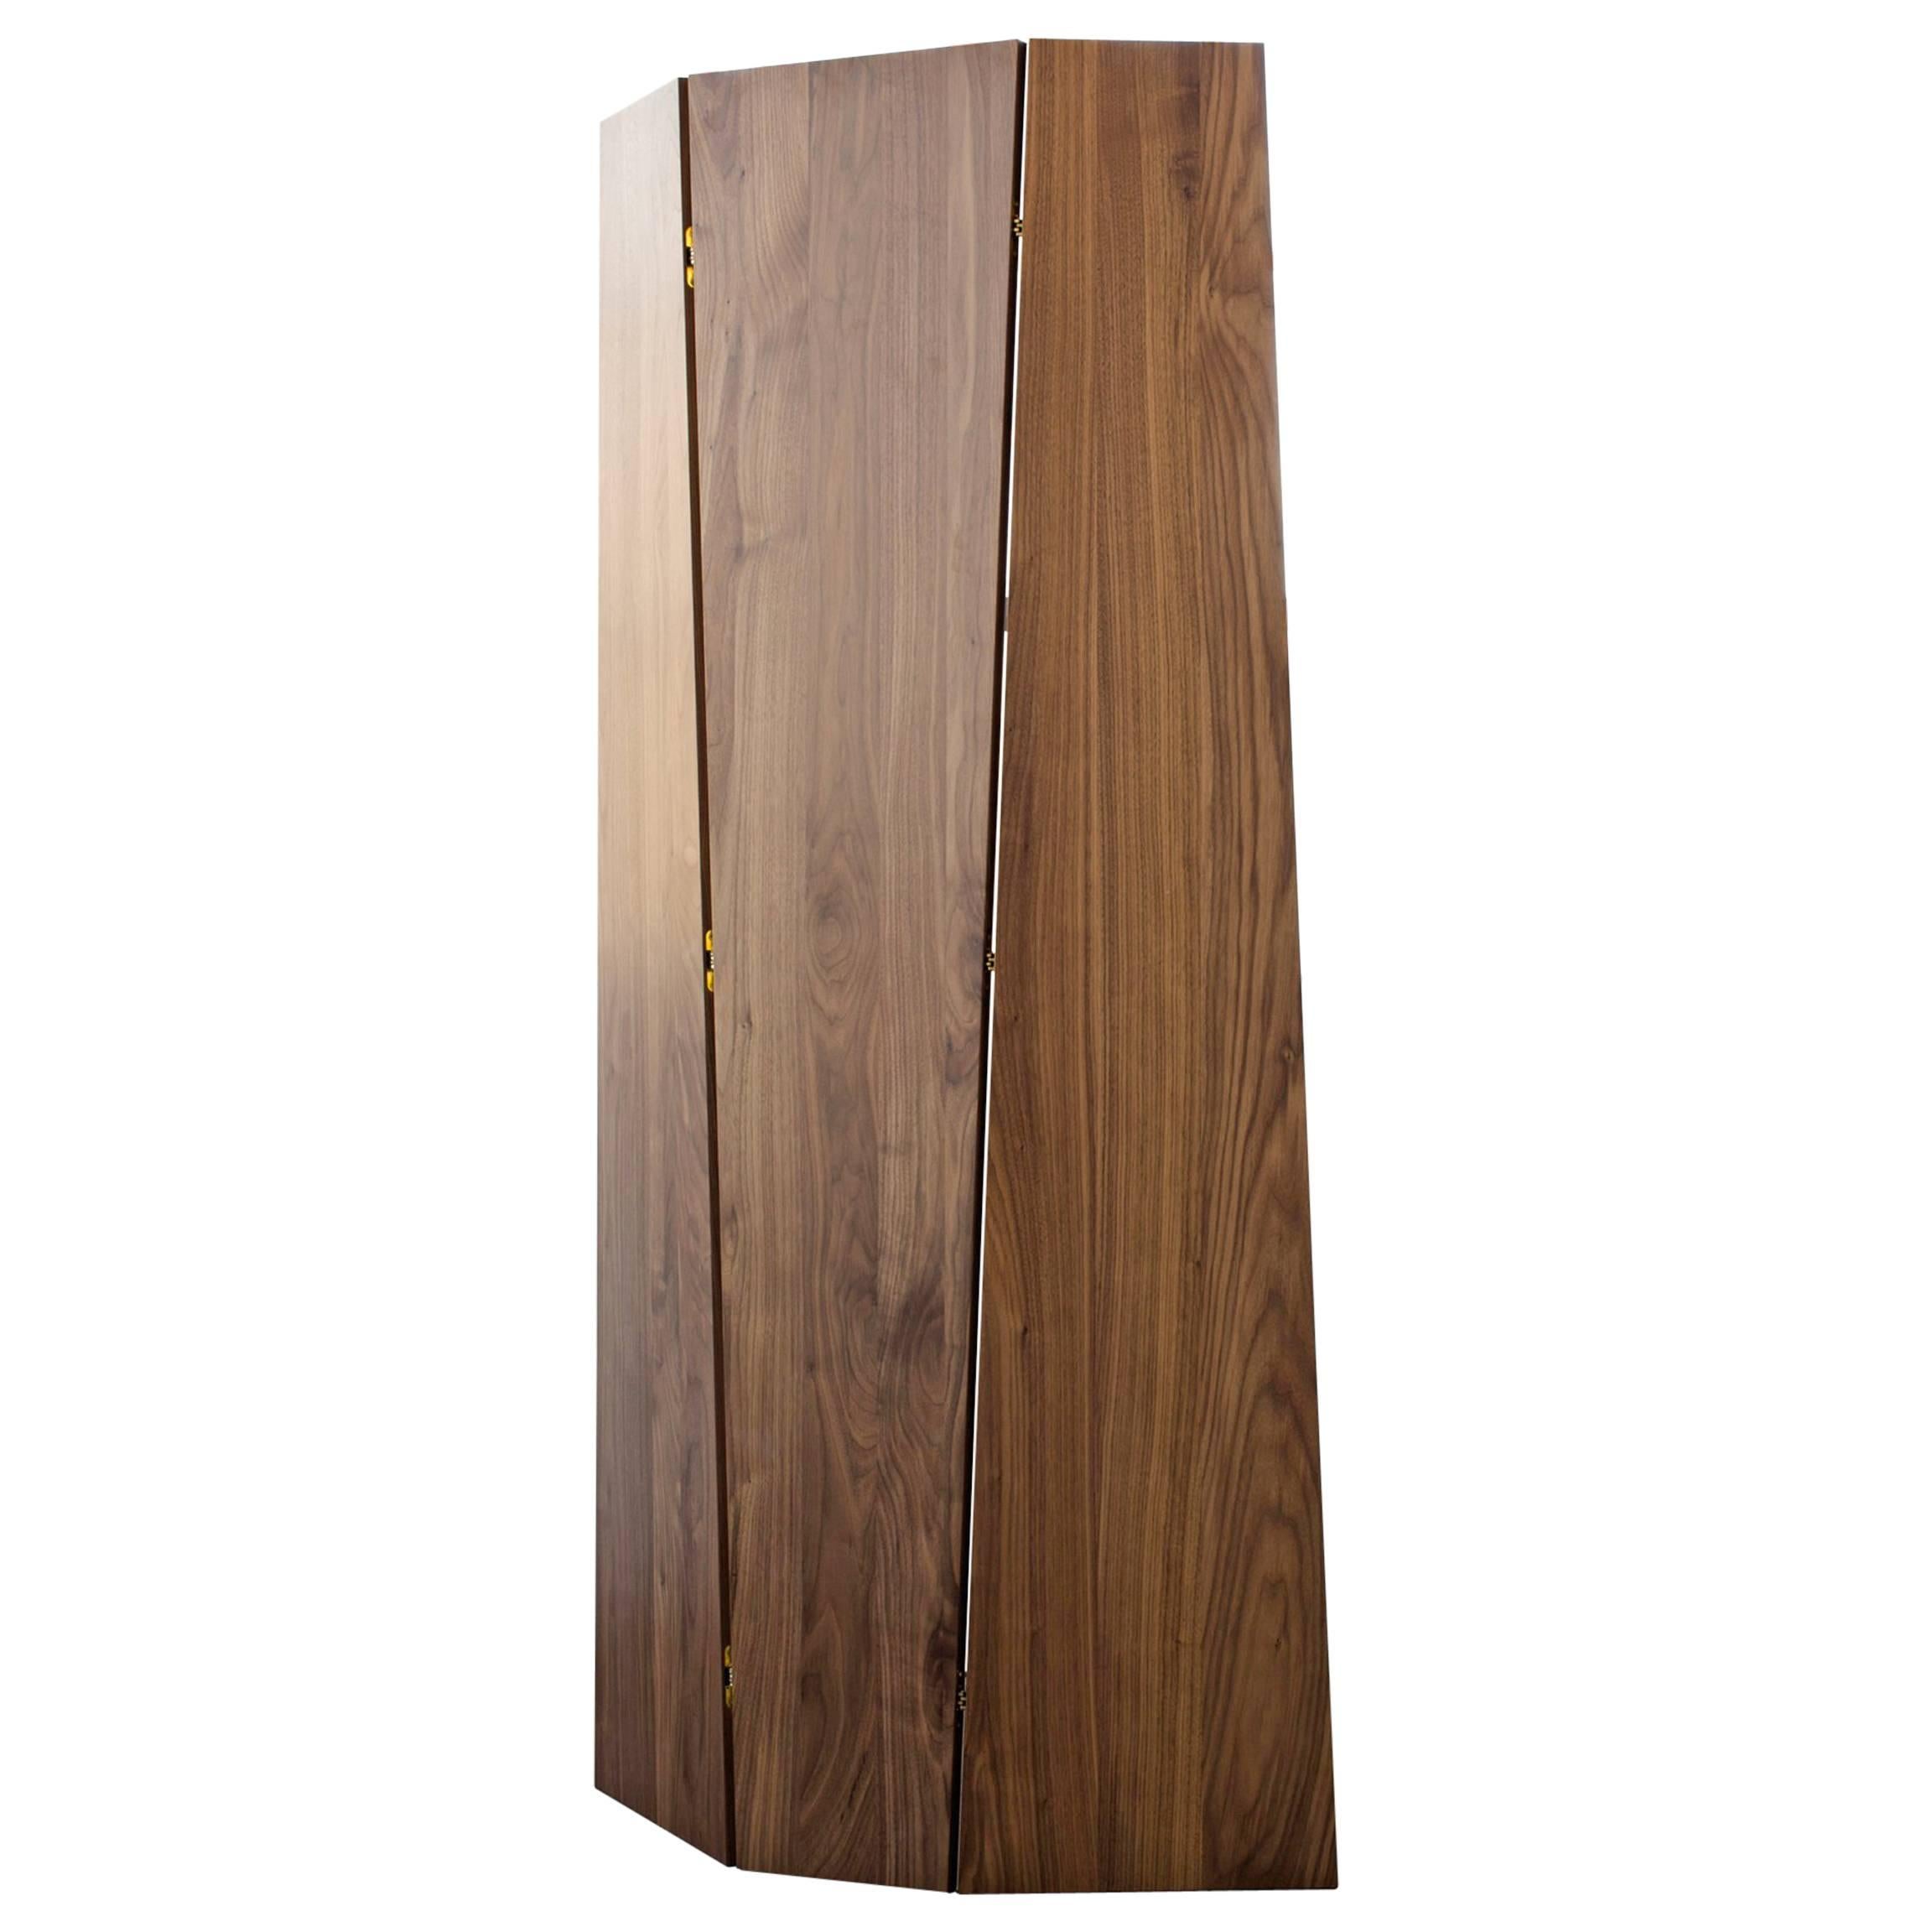 Sculptural, self-supporting screen for use as a stand-alone or combined to create a larger privacy wall. The tri-fold design can be oriented with the form tapering either up or down. 

Shown in solid walnut and bronze.

Dimensions: 78” height x 42”